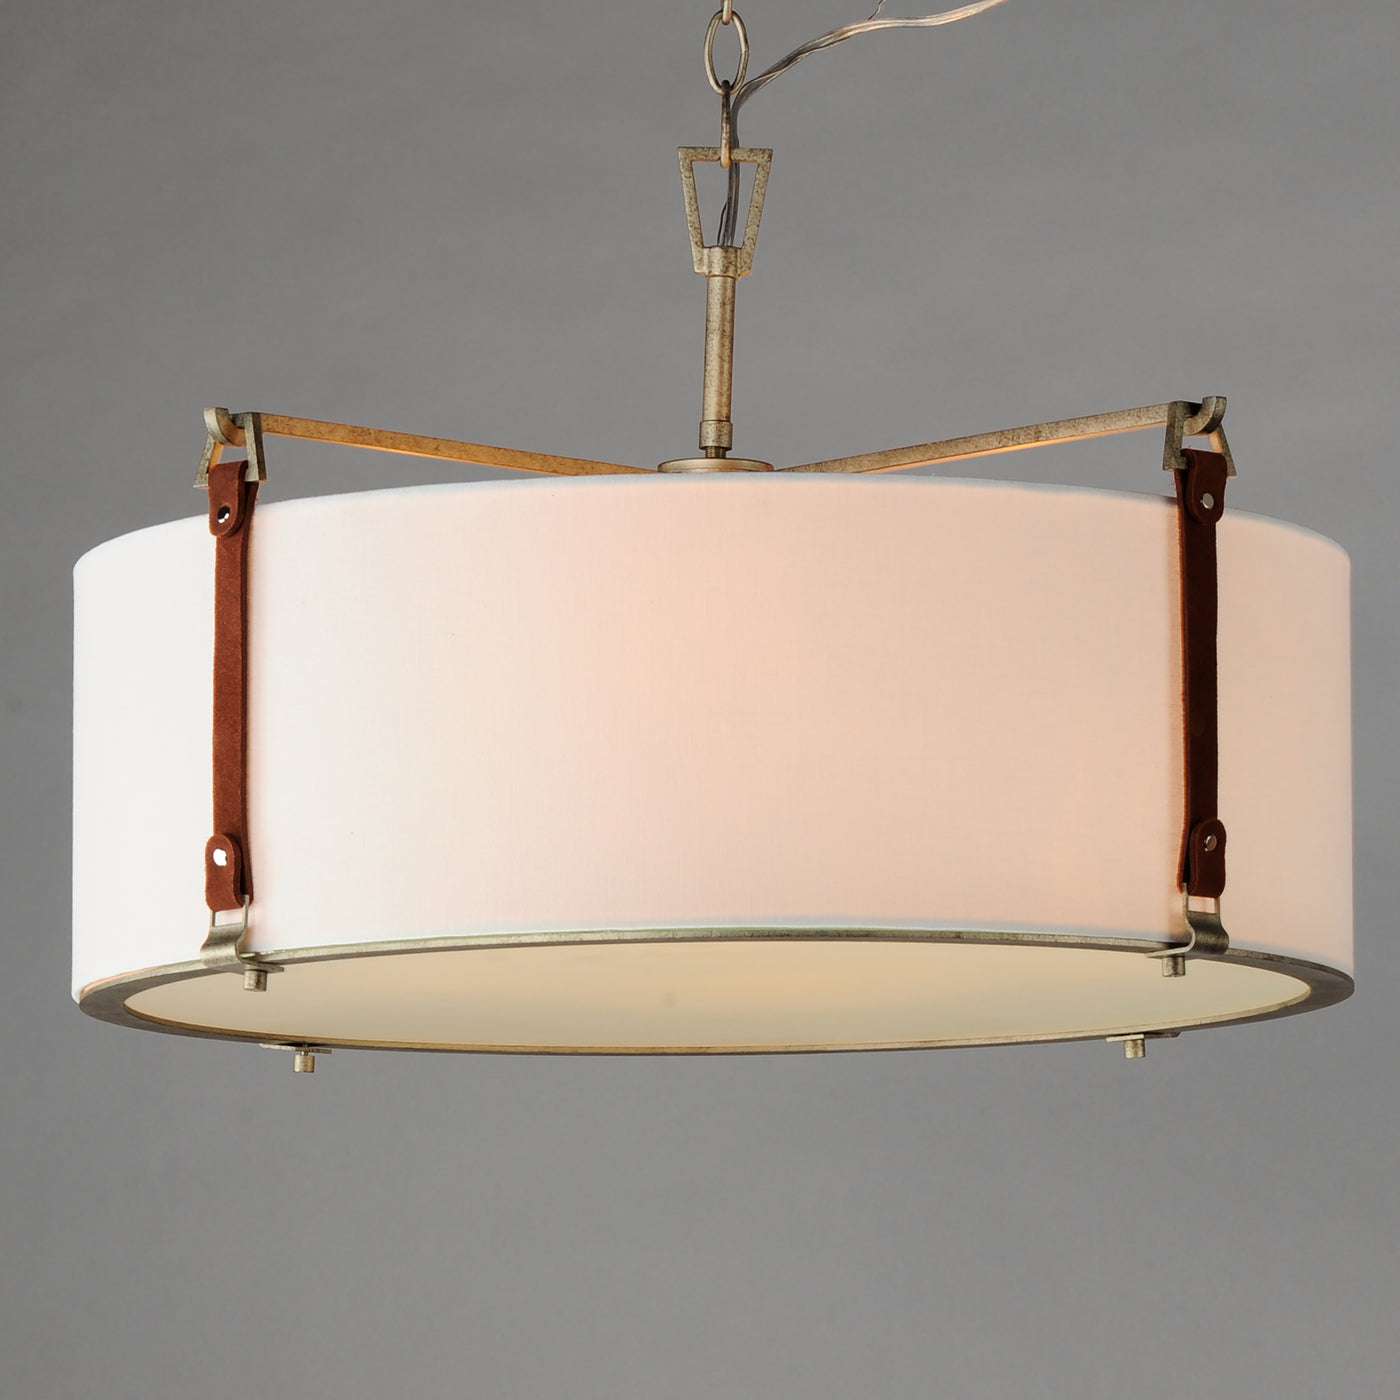 Weathered Zinc Frame and Brown Suede Strap with Linen Shade Chandelier